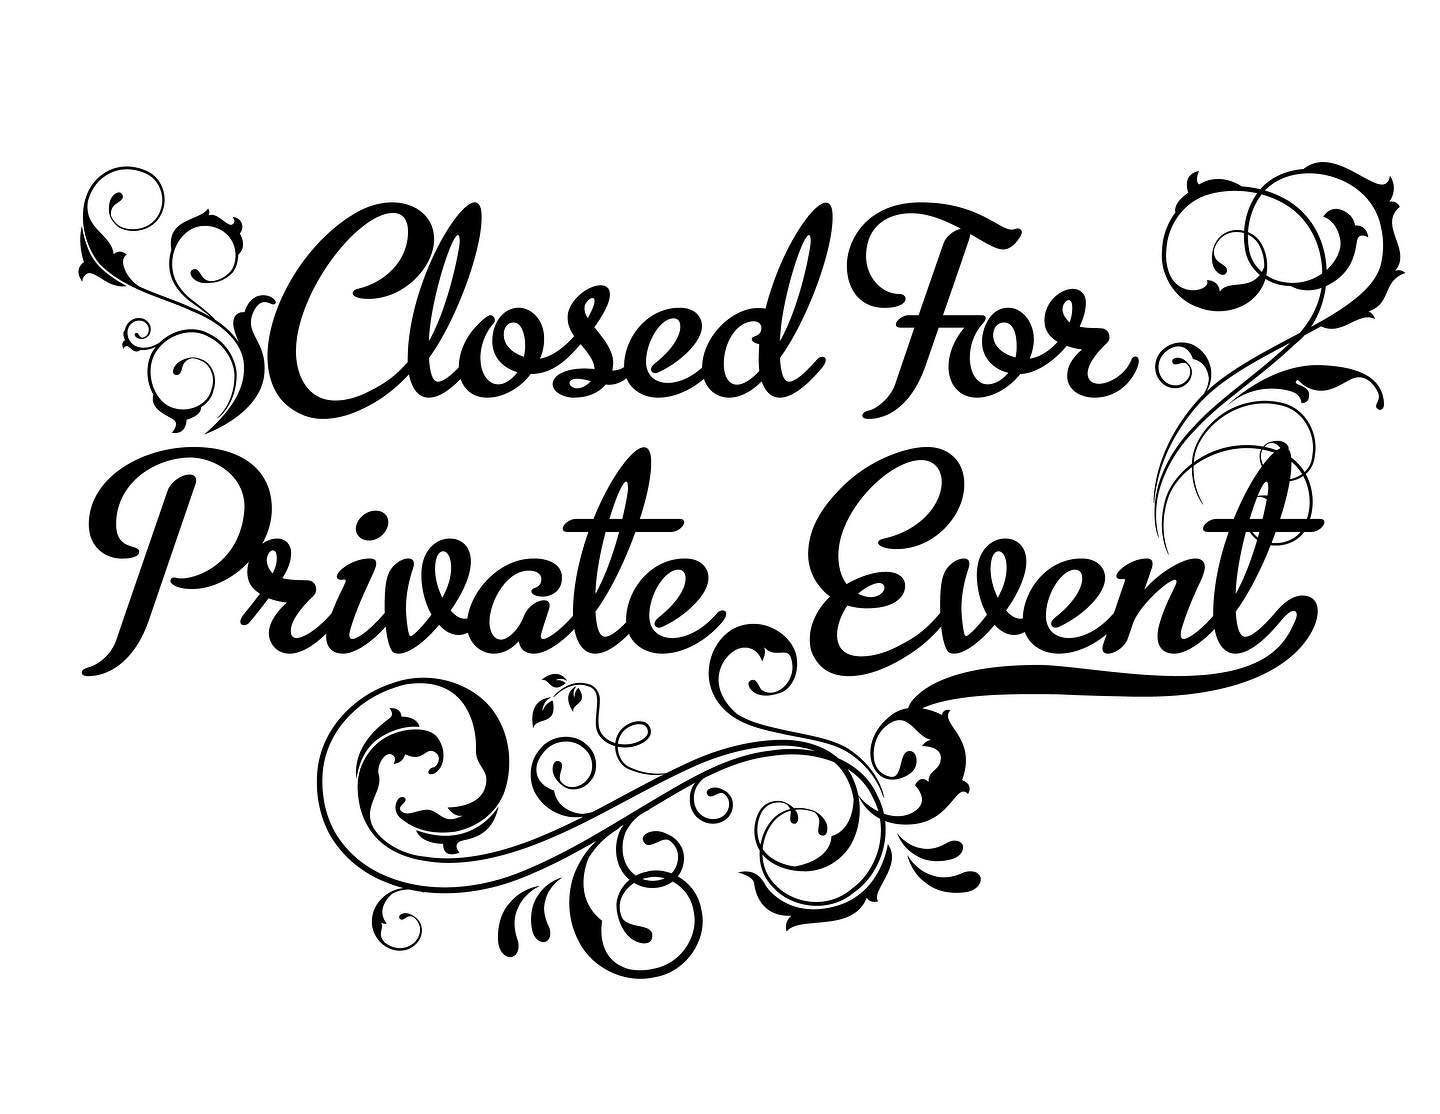 Closed Saturday April 27th for a celebration of life for a friend and customer. Please call or text your next reservation request to 208-884-0142